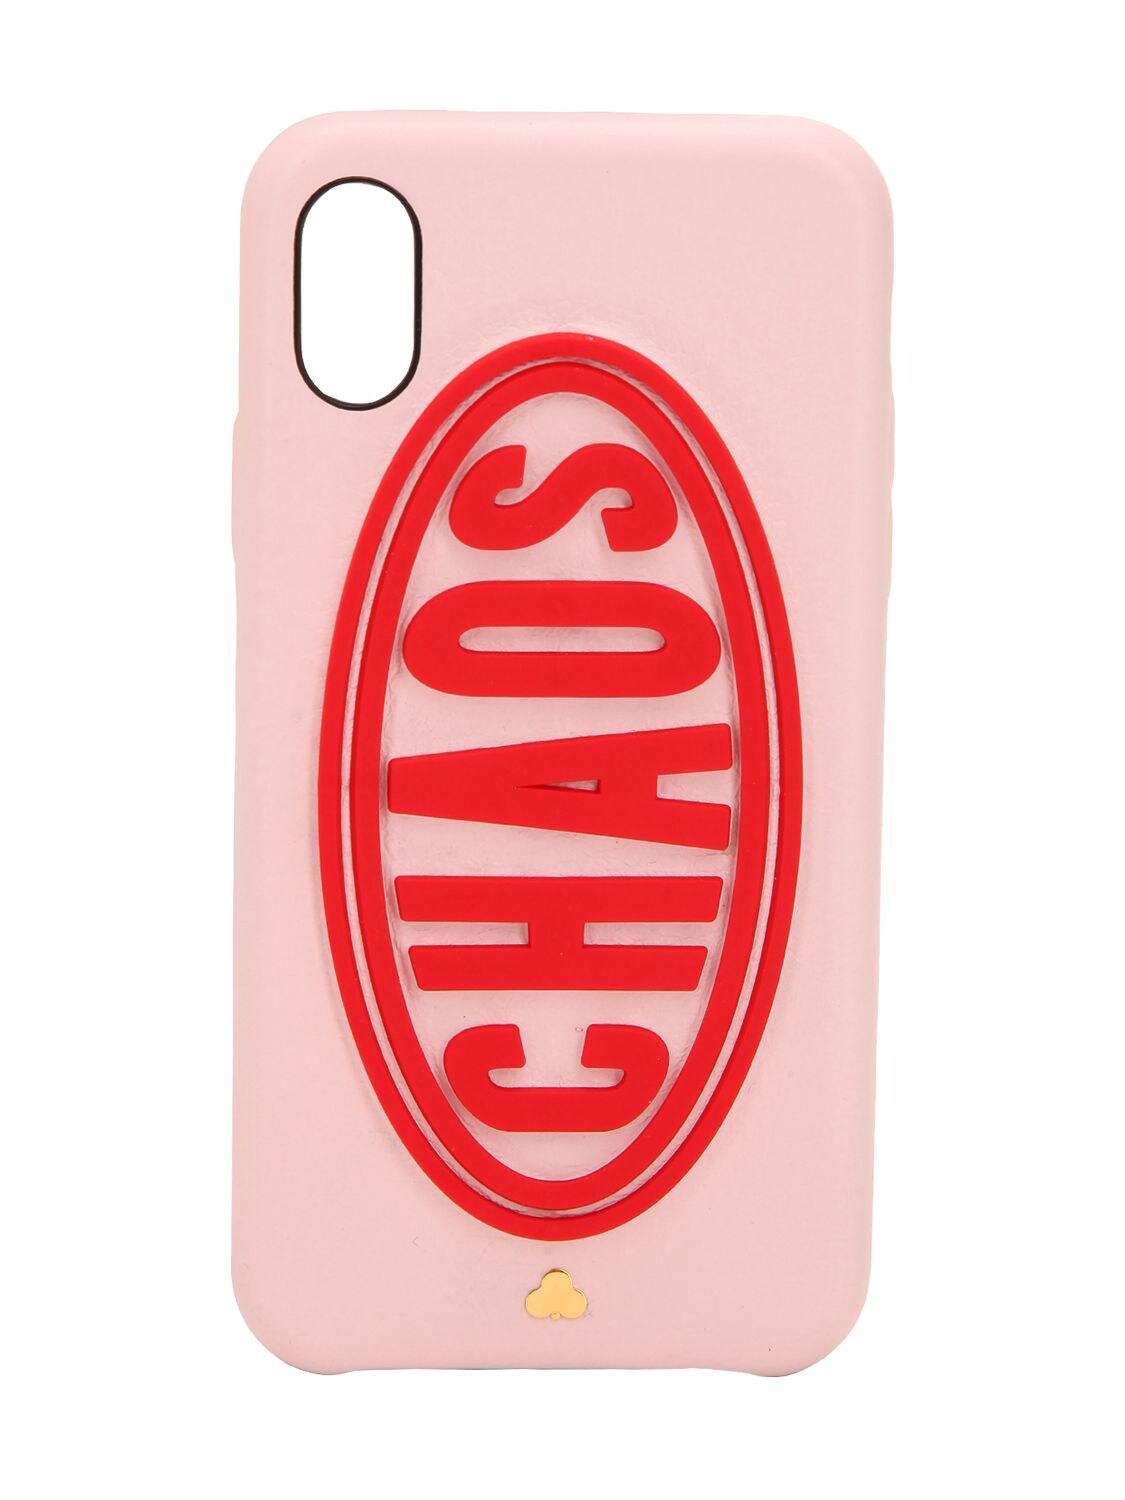 Chaos Daytona Leather Iphone 7/8 Plus Cover In Pink,red